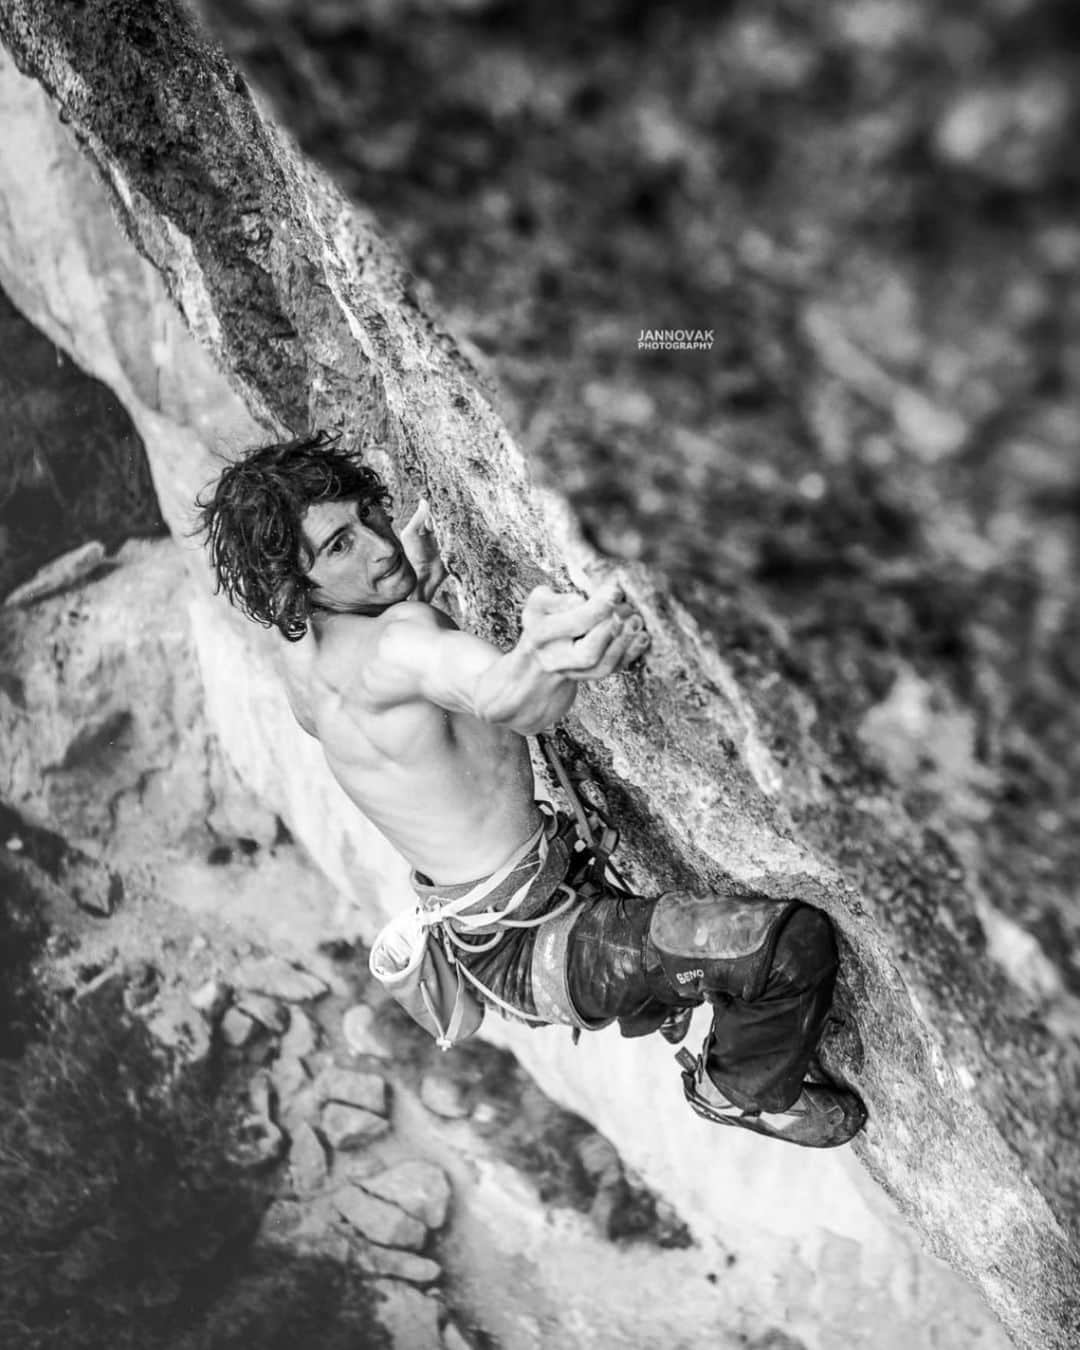 デイブ・グラハムのインスタグラム：「One year ago I made an ascent of La Rambla [9A+] here in Siurana 🥳 !! Seems like a suitable time to finally share the send footage 😅!! Its nothing spectacular, just a wide shot from the ground of the final crux section, but @pdufraisse was kind enough to run up and film me climbing so I might have a nice little souvenir if I sent, and I admit I’m very grateful this little clip exists 🙌🏻 It brings back amazing memories and sensations from last years battle with the beast of a route, especially the mental aspect of the experience 👐🏻 Watching it again after so long reminds me of the peace we must find with ourselves and our surroundings in order to accomplish our goals 🙇🏻‍♂️ As I reflect on that wisdom amidst my full blown siege of La Capella [9B] which is over a month long now, and way way down the rabbit hole 🤯 I need to remember to truly embrace the moment, listen to the birds, and just think about the climbing ; not operate within some premeditated vision of accomplishing my goal, but try to let the goal unfold on its own and enjoy what happens 😳 This advice might help me move onward in my journey, I think I needed that reminder, let’s see what happens tomorrow 🤔 A MUERTE 🤪🤪🤪Check my IG TV for the clip 🤟 !!! @adidas @adidasterrex @fiveten_official @petzl_official @climb_up_officiel @frictionlabs @sendclimbing @climbskinspain @alizee_dufraisse 😘」